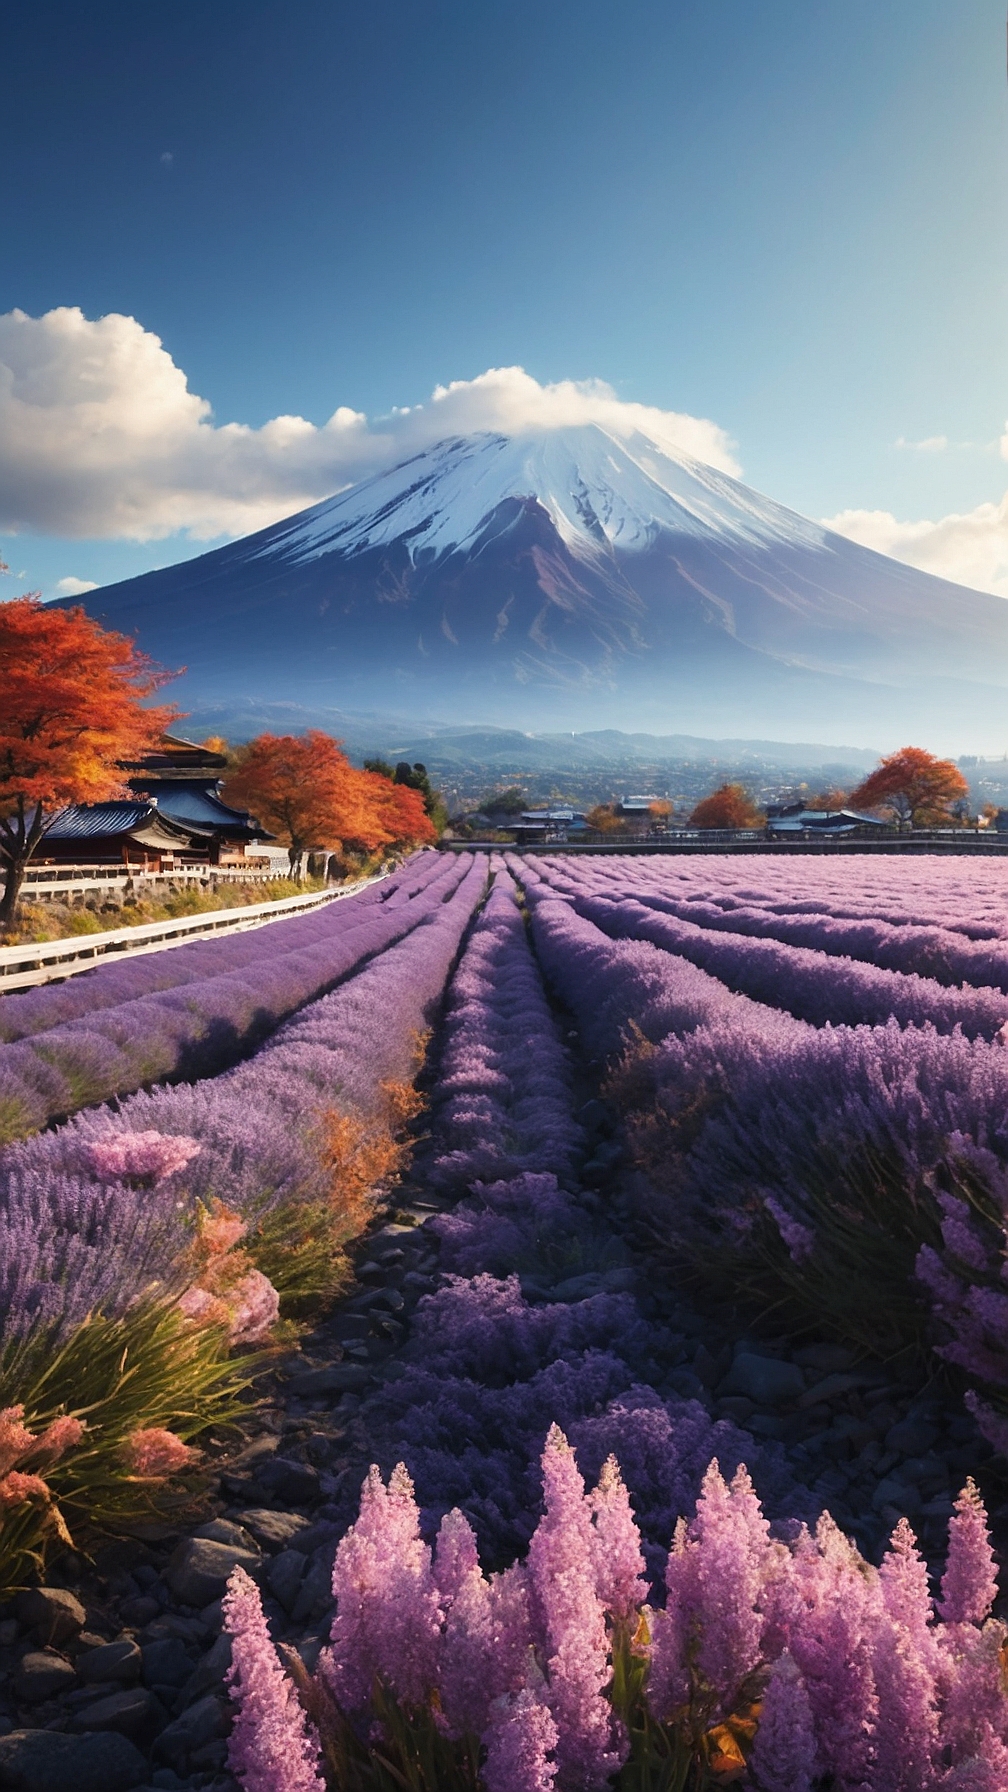 An ultra detailed, realistic, digital art, featuring Mt. Fuji: Showcase Japan's iconic landmark, Mt. Fuji, in different seasons and perspectives, from its majestic snow-capped peak to the surrounding fields of lavender or the autumn foliage at its base. happy accidents, exquisite detail, 30 megapixels, 4k, CanonEOS 5D Mark IV DSLR, 85mm lens, sharp focus, intricate detail, long exposure, f/2, ISO 100, shutter speed 1/125, diffuse backlighting, award-winning photograph, facing camera, looking into camera, monovision, perfect contrast, high sharpness, face symmetry, depth of field, ultra-detailed photography, raytracing, global illumination, smooth, ultra high definition, 8k, unreal engine 5, ultra sharp focus, award-winning photography